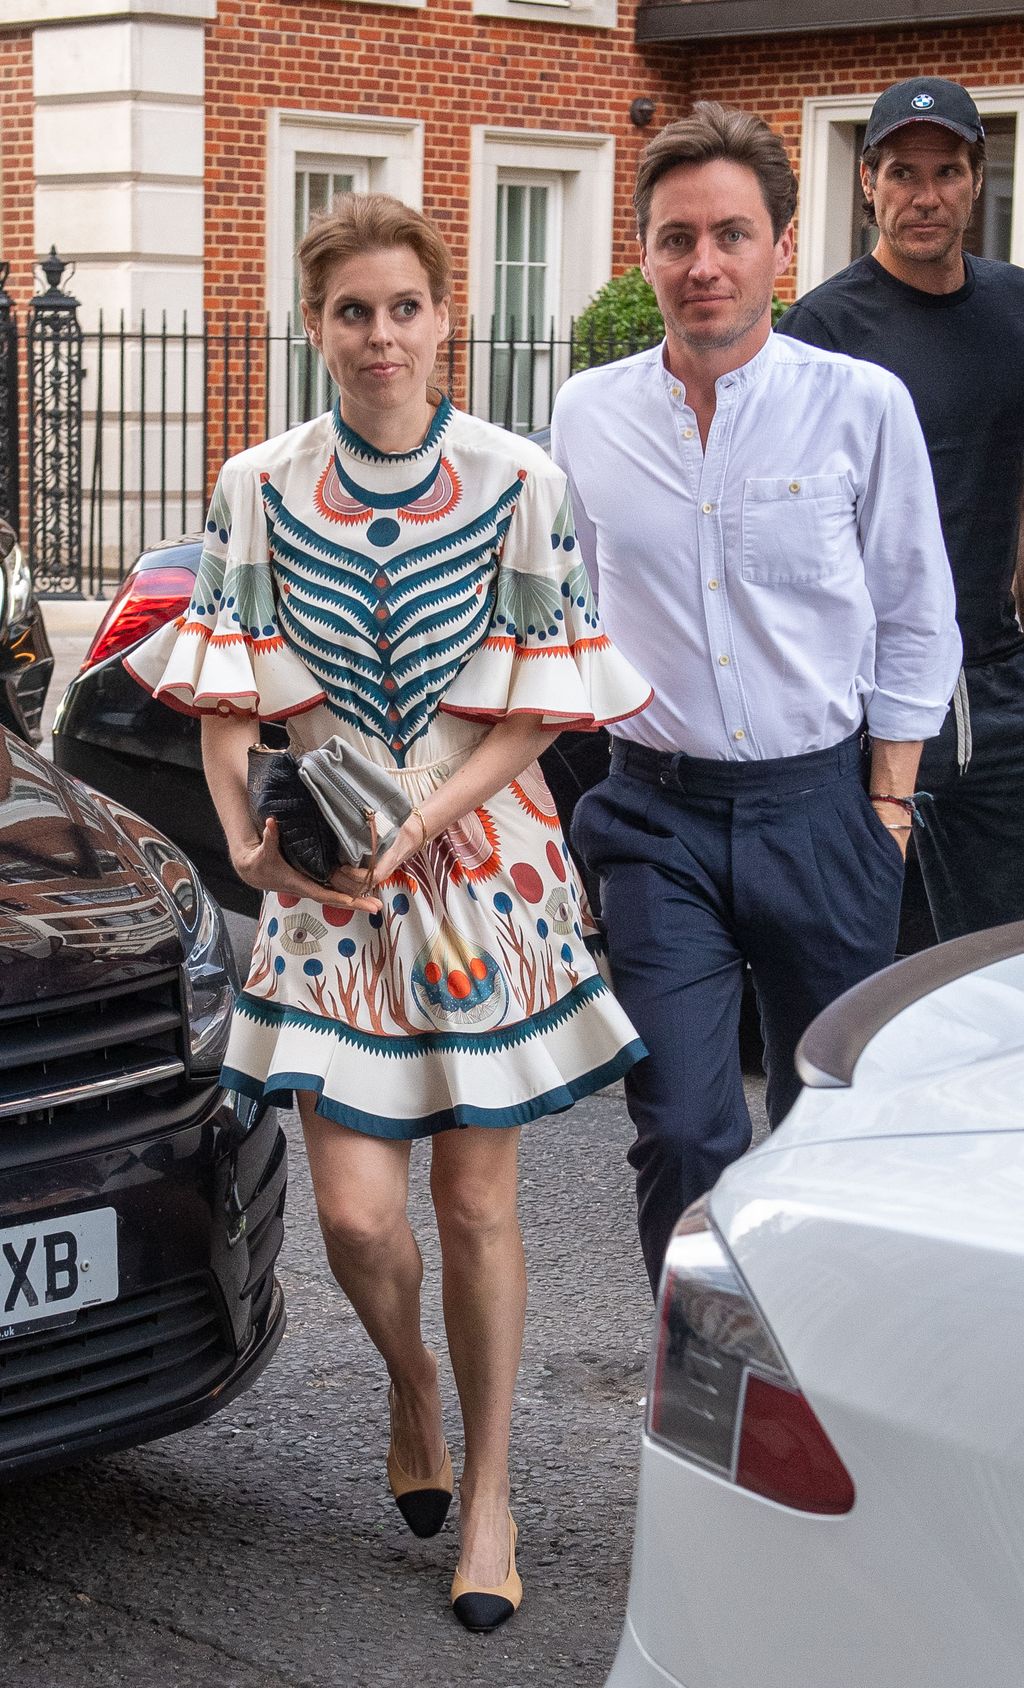 Princess Beatrice and Edoardo Mapelli Mozzi arrive at The Twenty Two Hotel for a dinner hosted by the hotel owner Jamie Reuben.